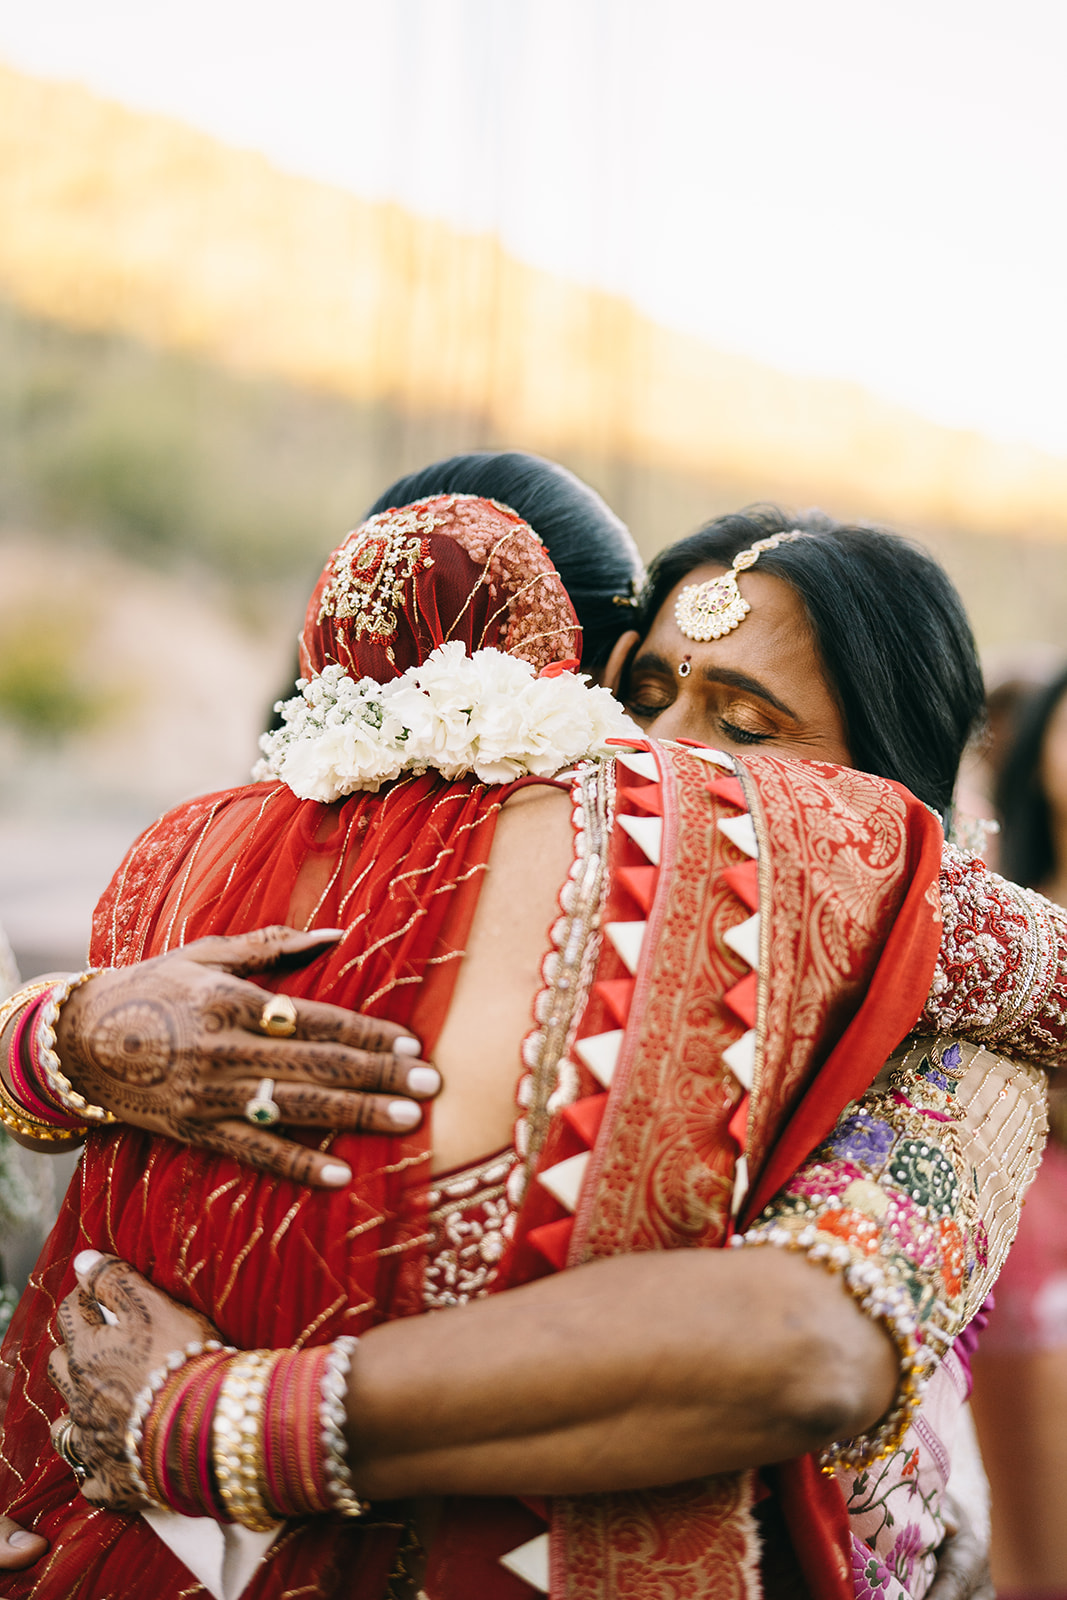 Indian bride being embraced by an older Indian woman with red and gold bangles and henna on her hand